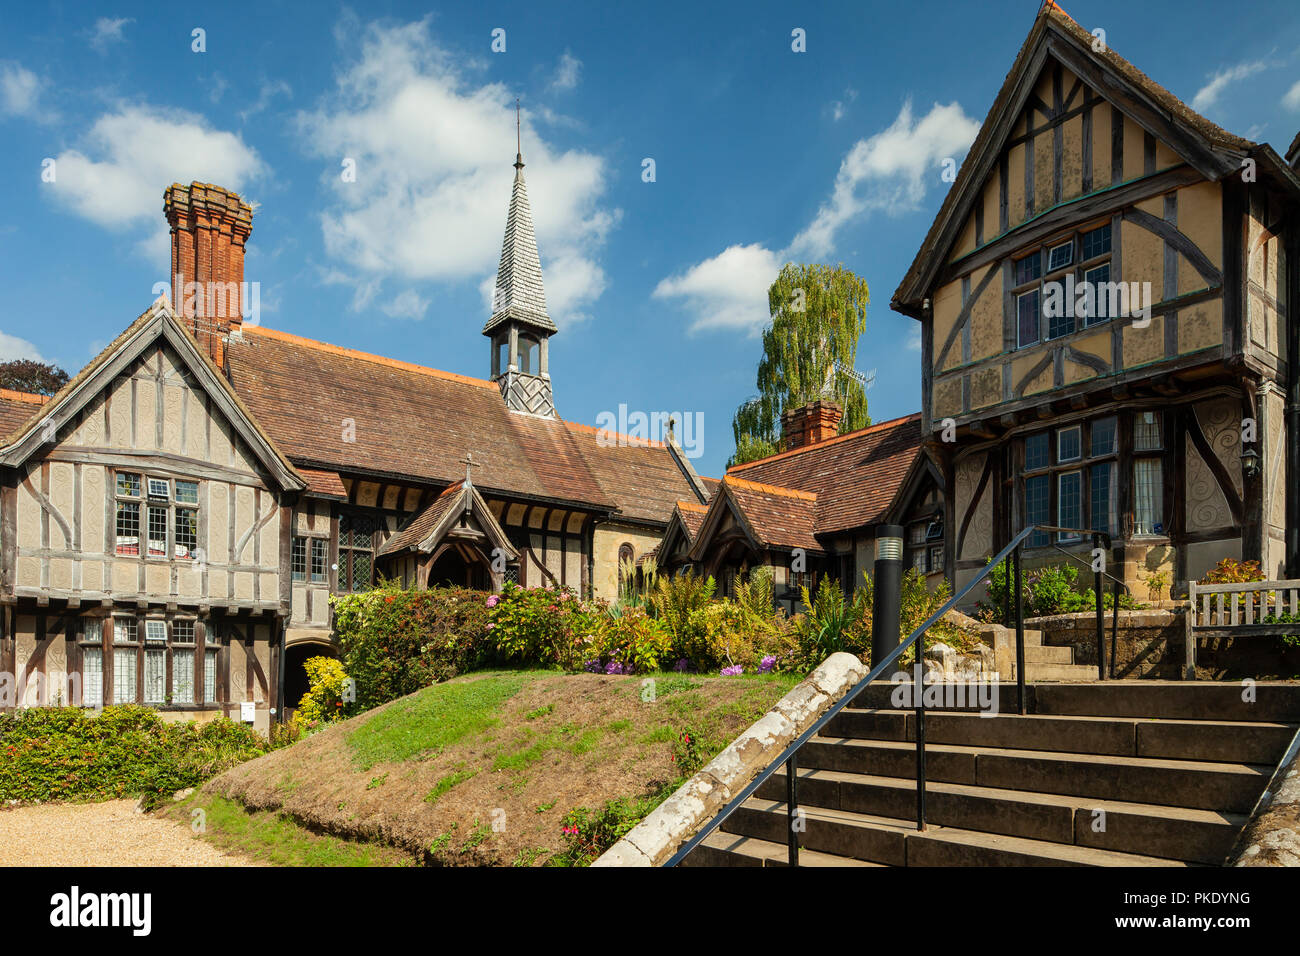 Late summer afternoon at St Mary's homes in Godstone, Surrey, UK. Stock Photo